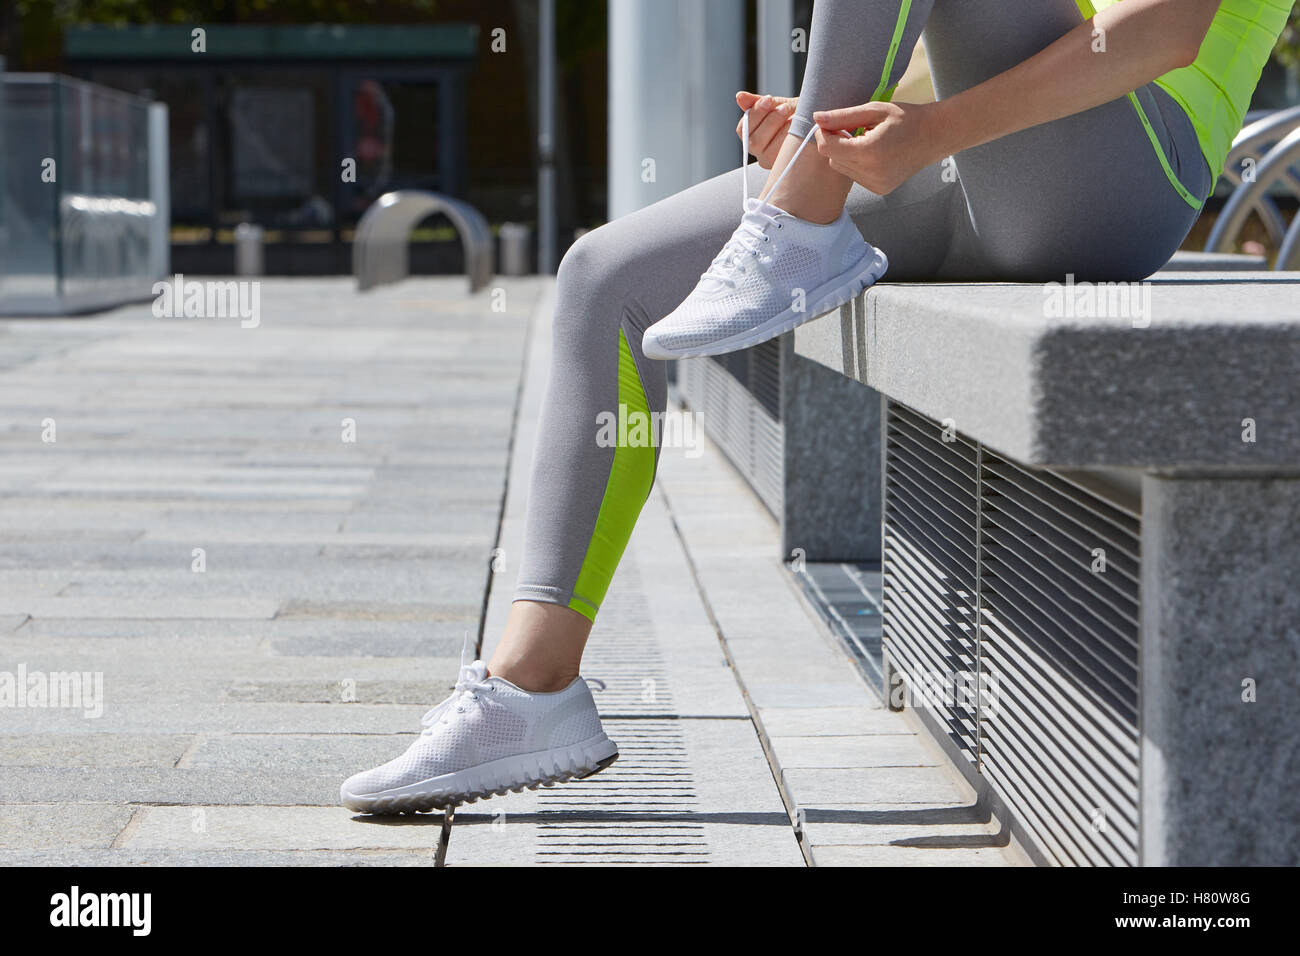 Woman tying shoelaces before running outdoor in the city Stock Photo